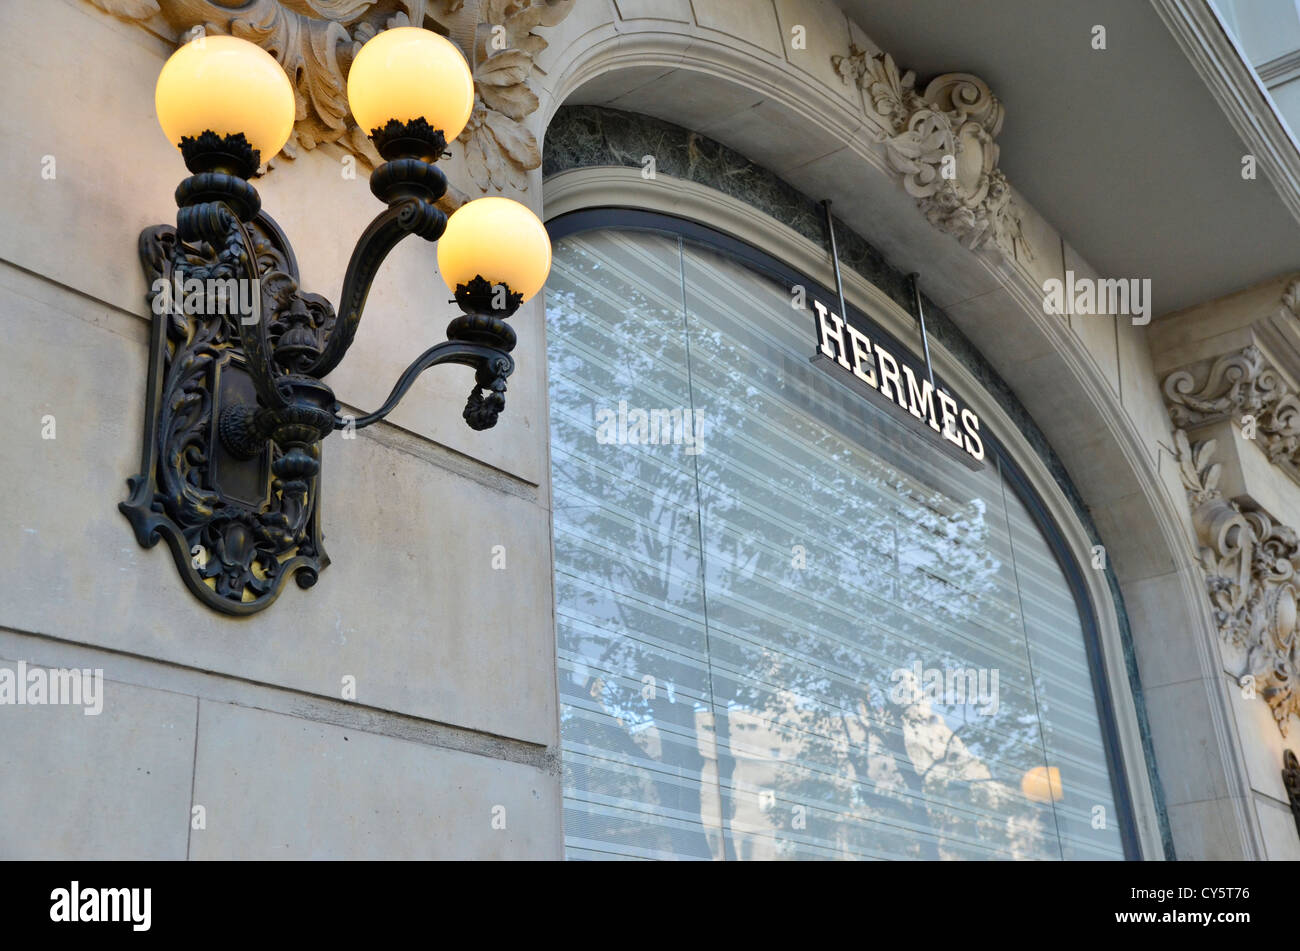 Hermes storefront hi-res stock photography and images - Alamy